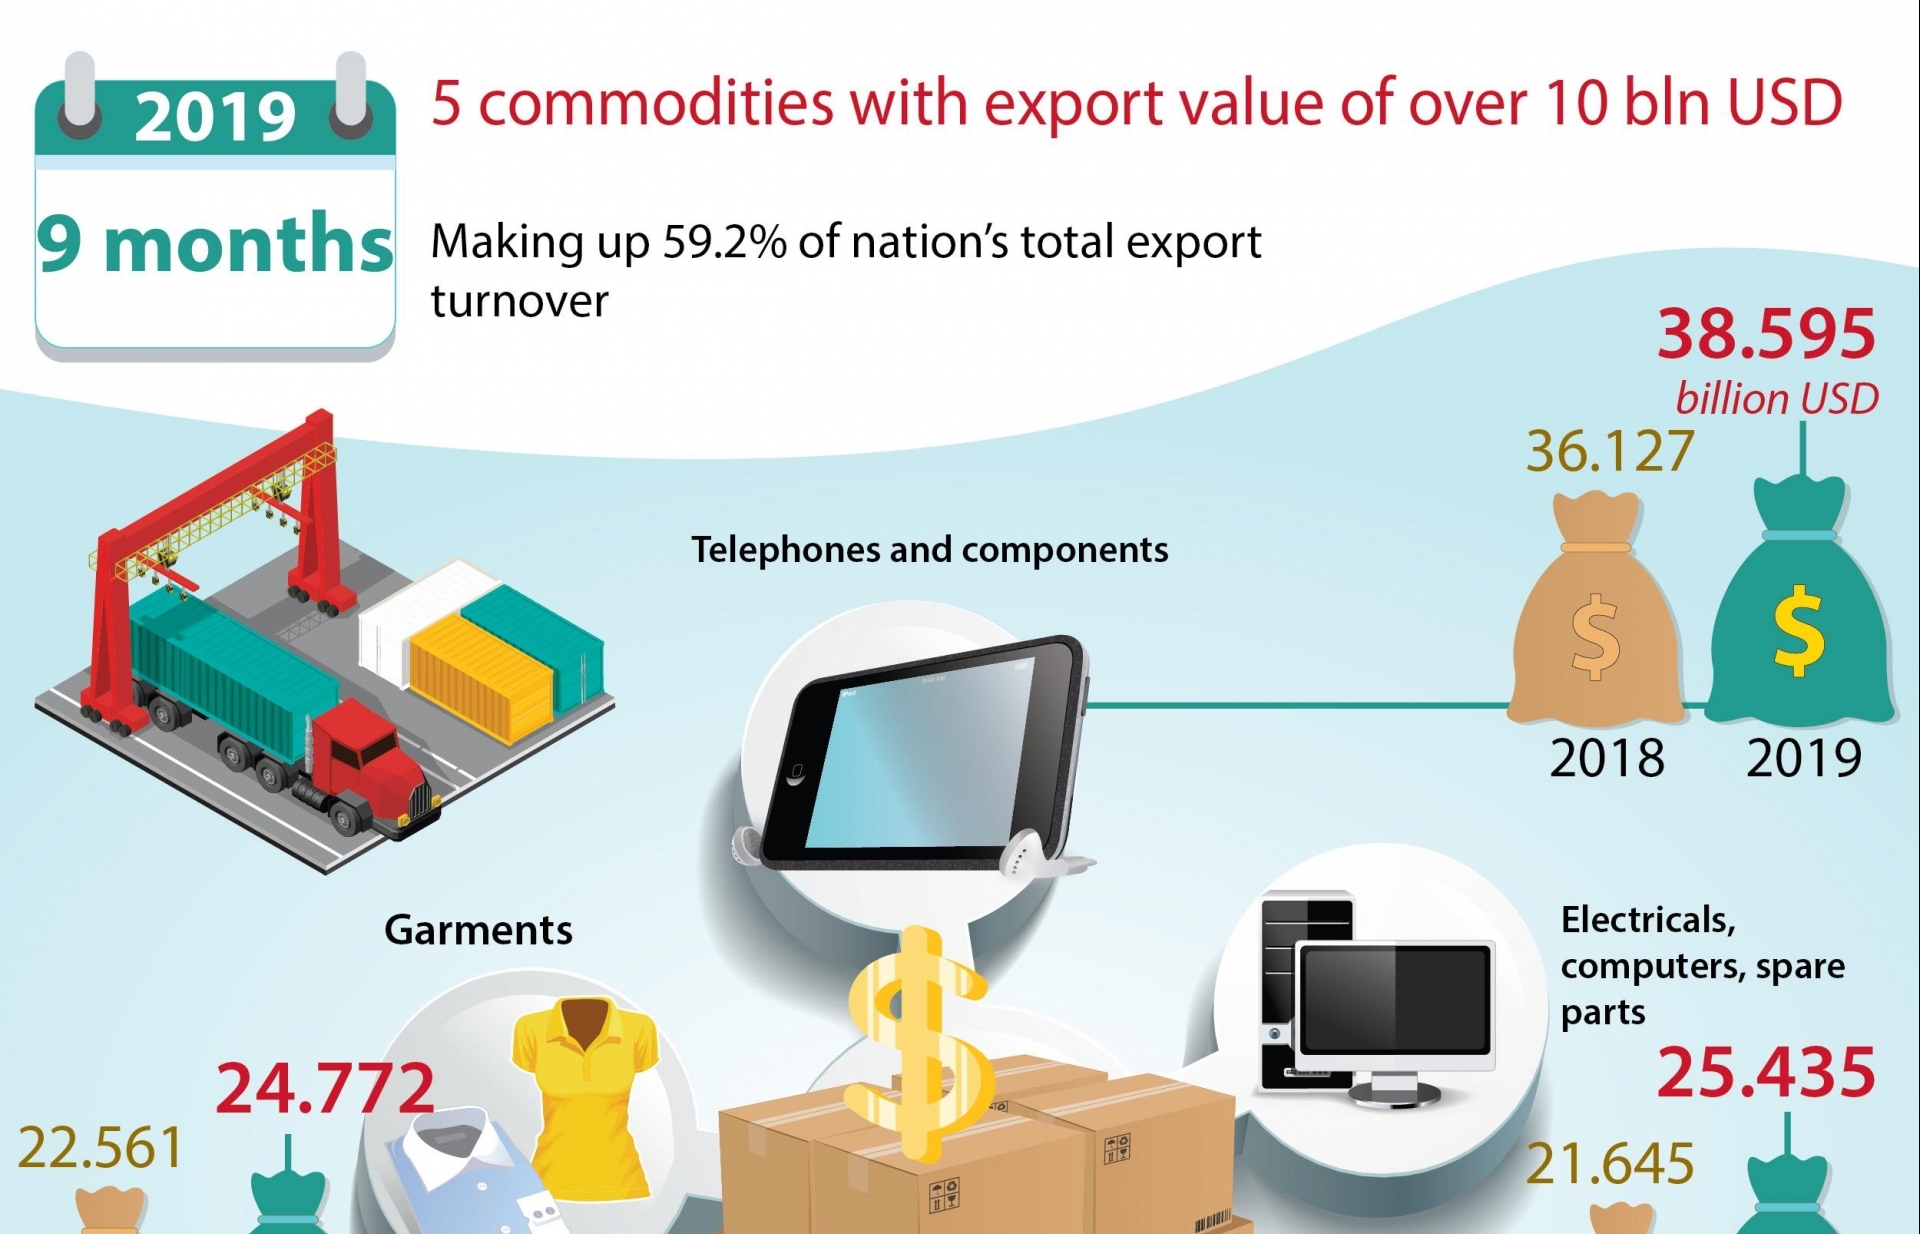 5 commodities with export value of over 10 bln USD